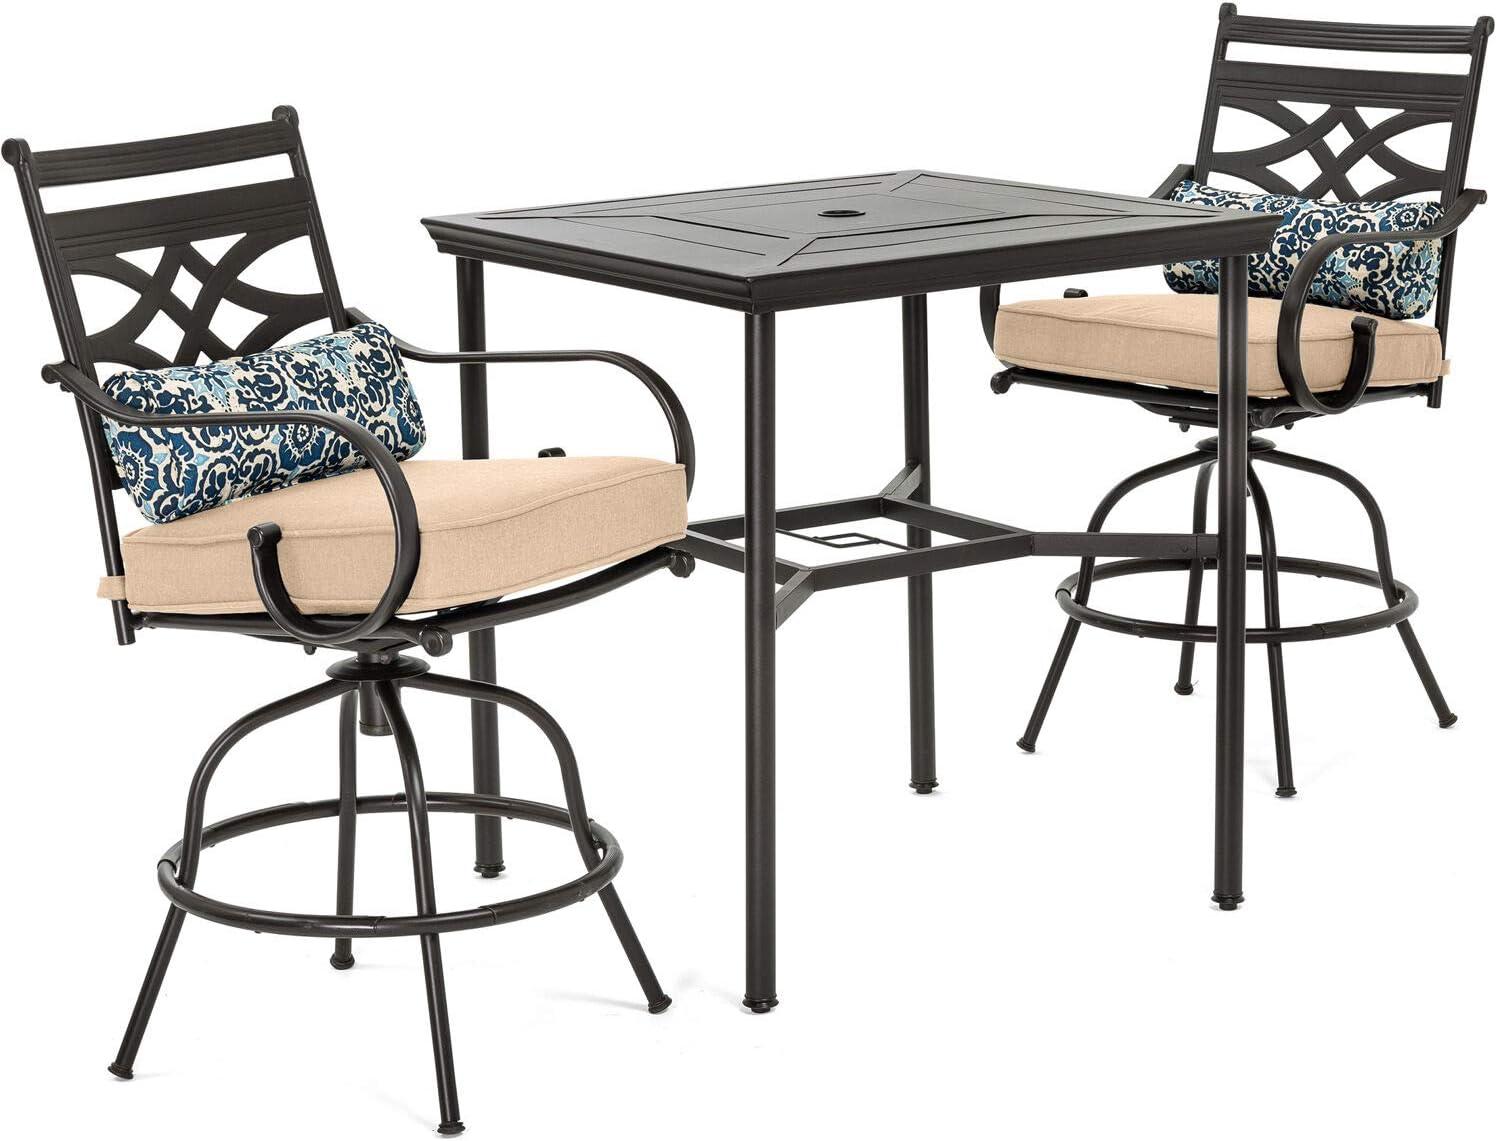 Elegant Montclair 3-Piece Tan High-Dining Patio Set with Swivel Chairs